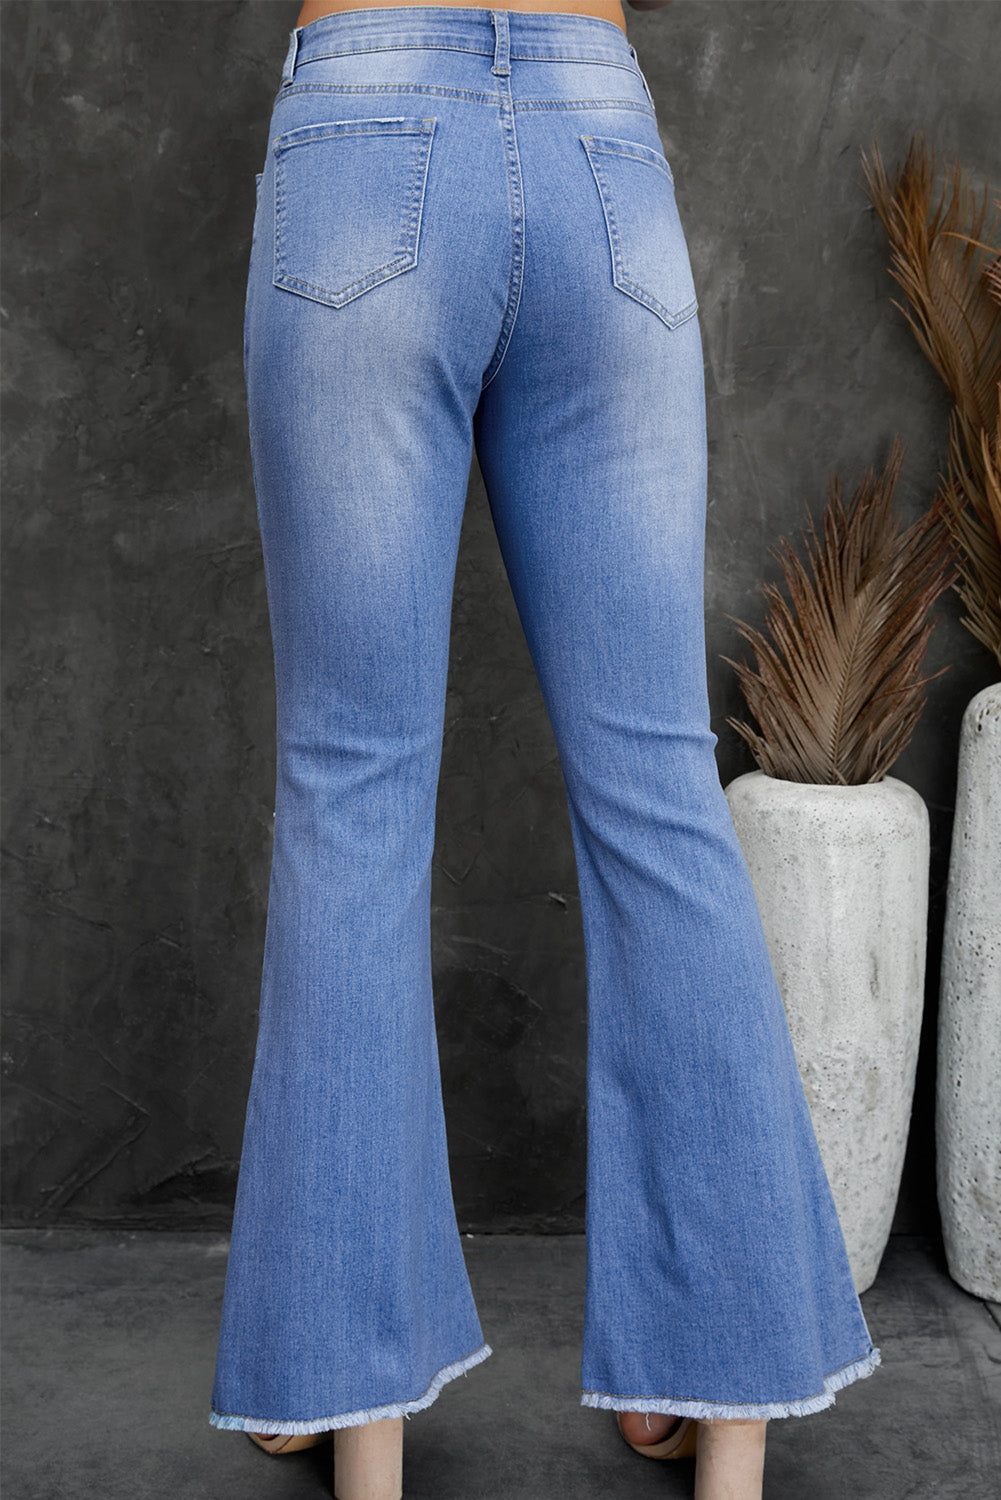 SOUTHERN HONEY HIGH WAIST BUTTON FLARE JEANS